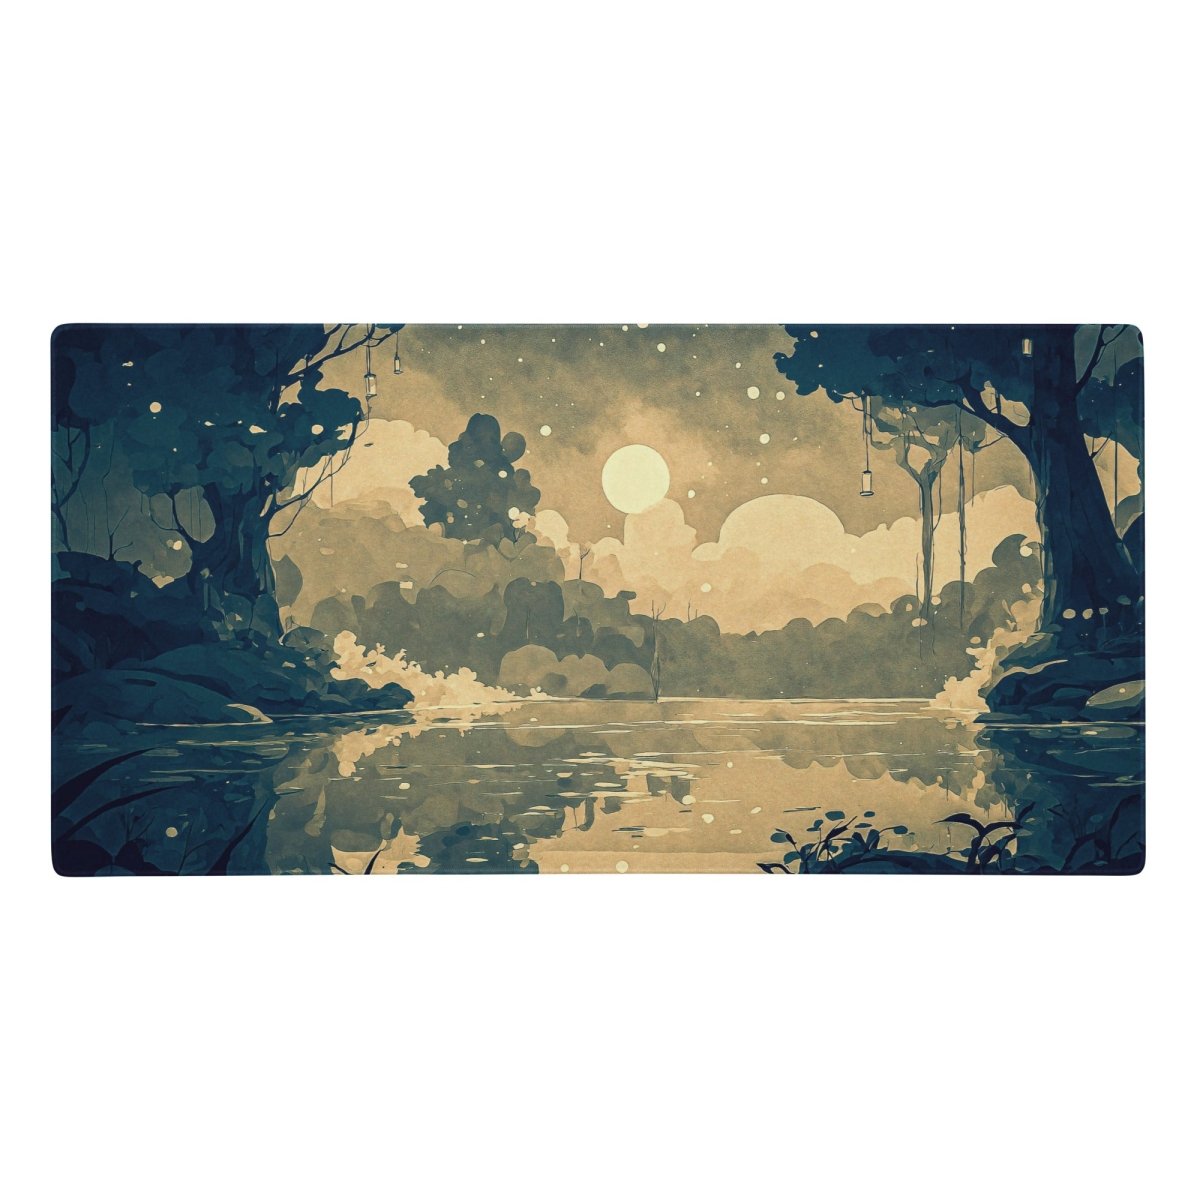 Moonlit reflection - Gaming mouse pad - Ever colorful